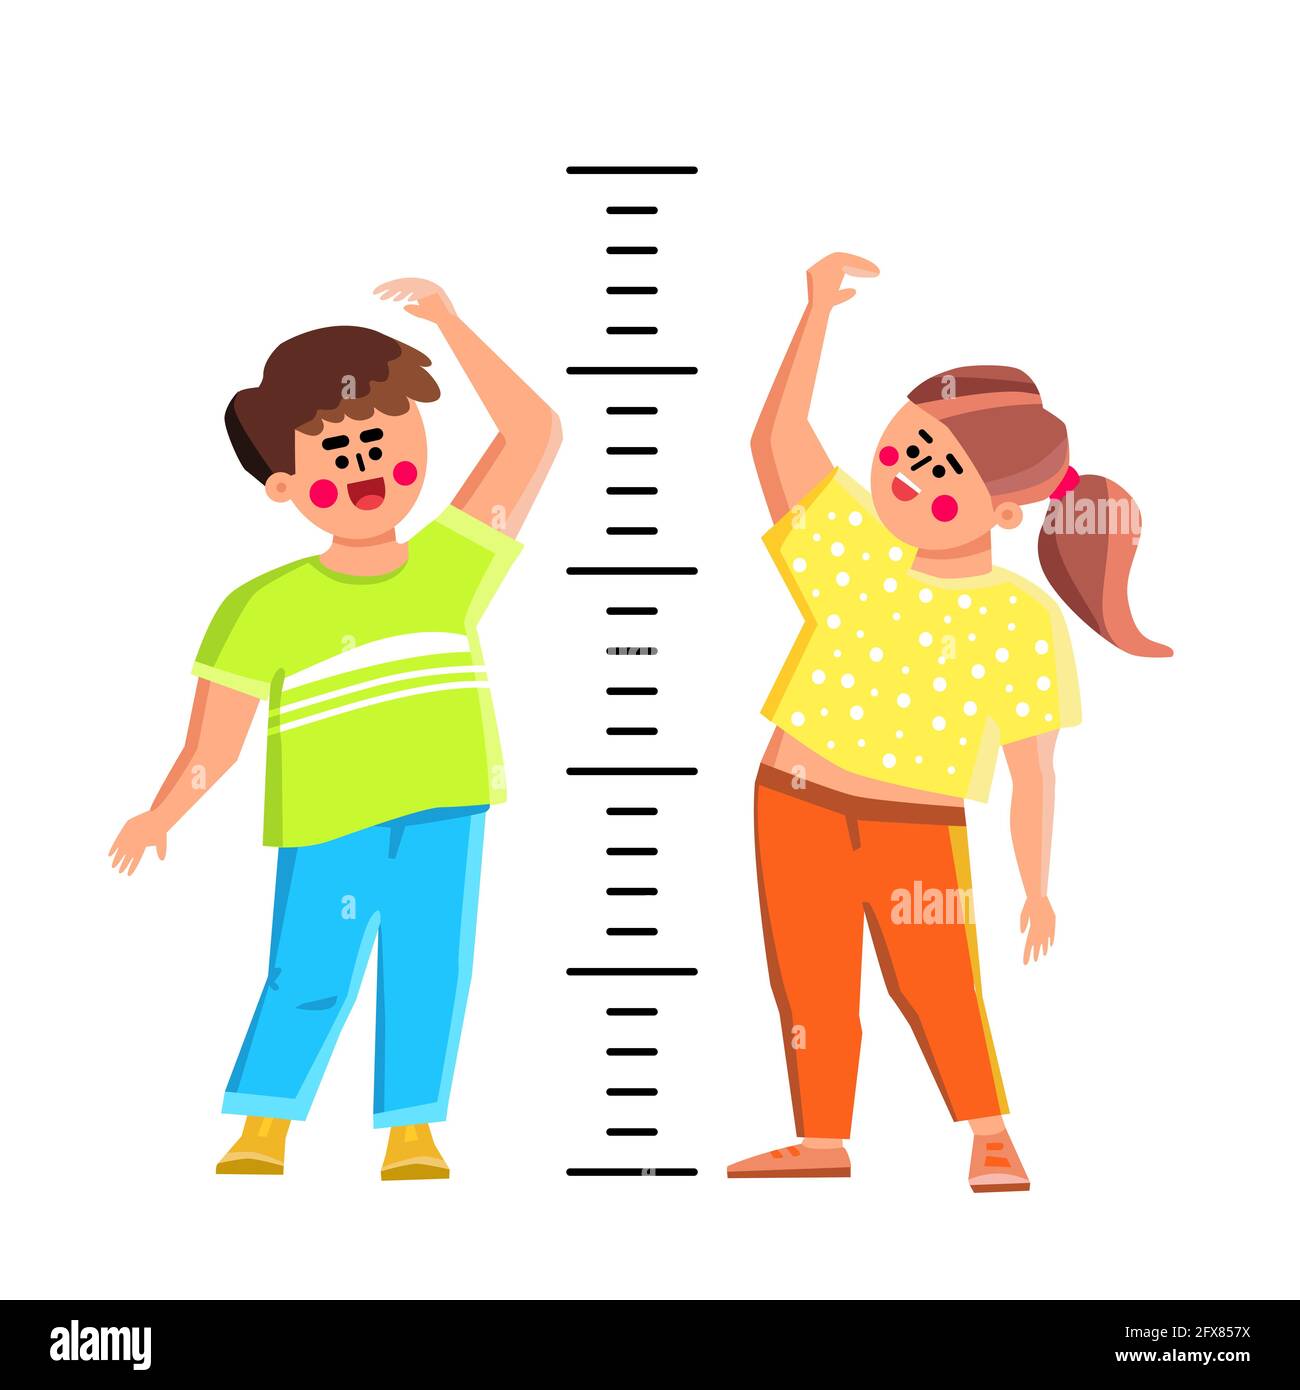 https://c8.alamy.com/comp/2FX857X/kids-measuring-height-with-measure-scale-vector-2FX857X.jpg